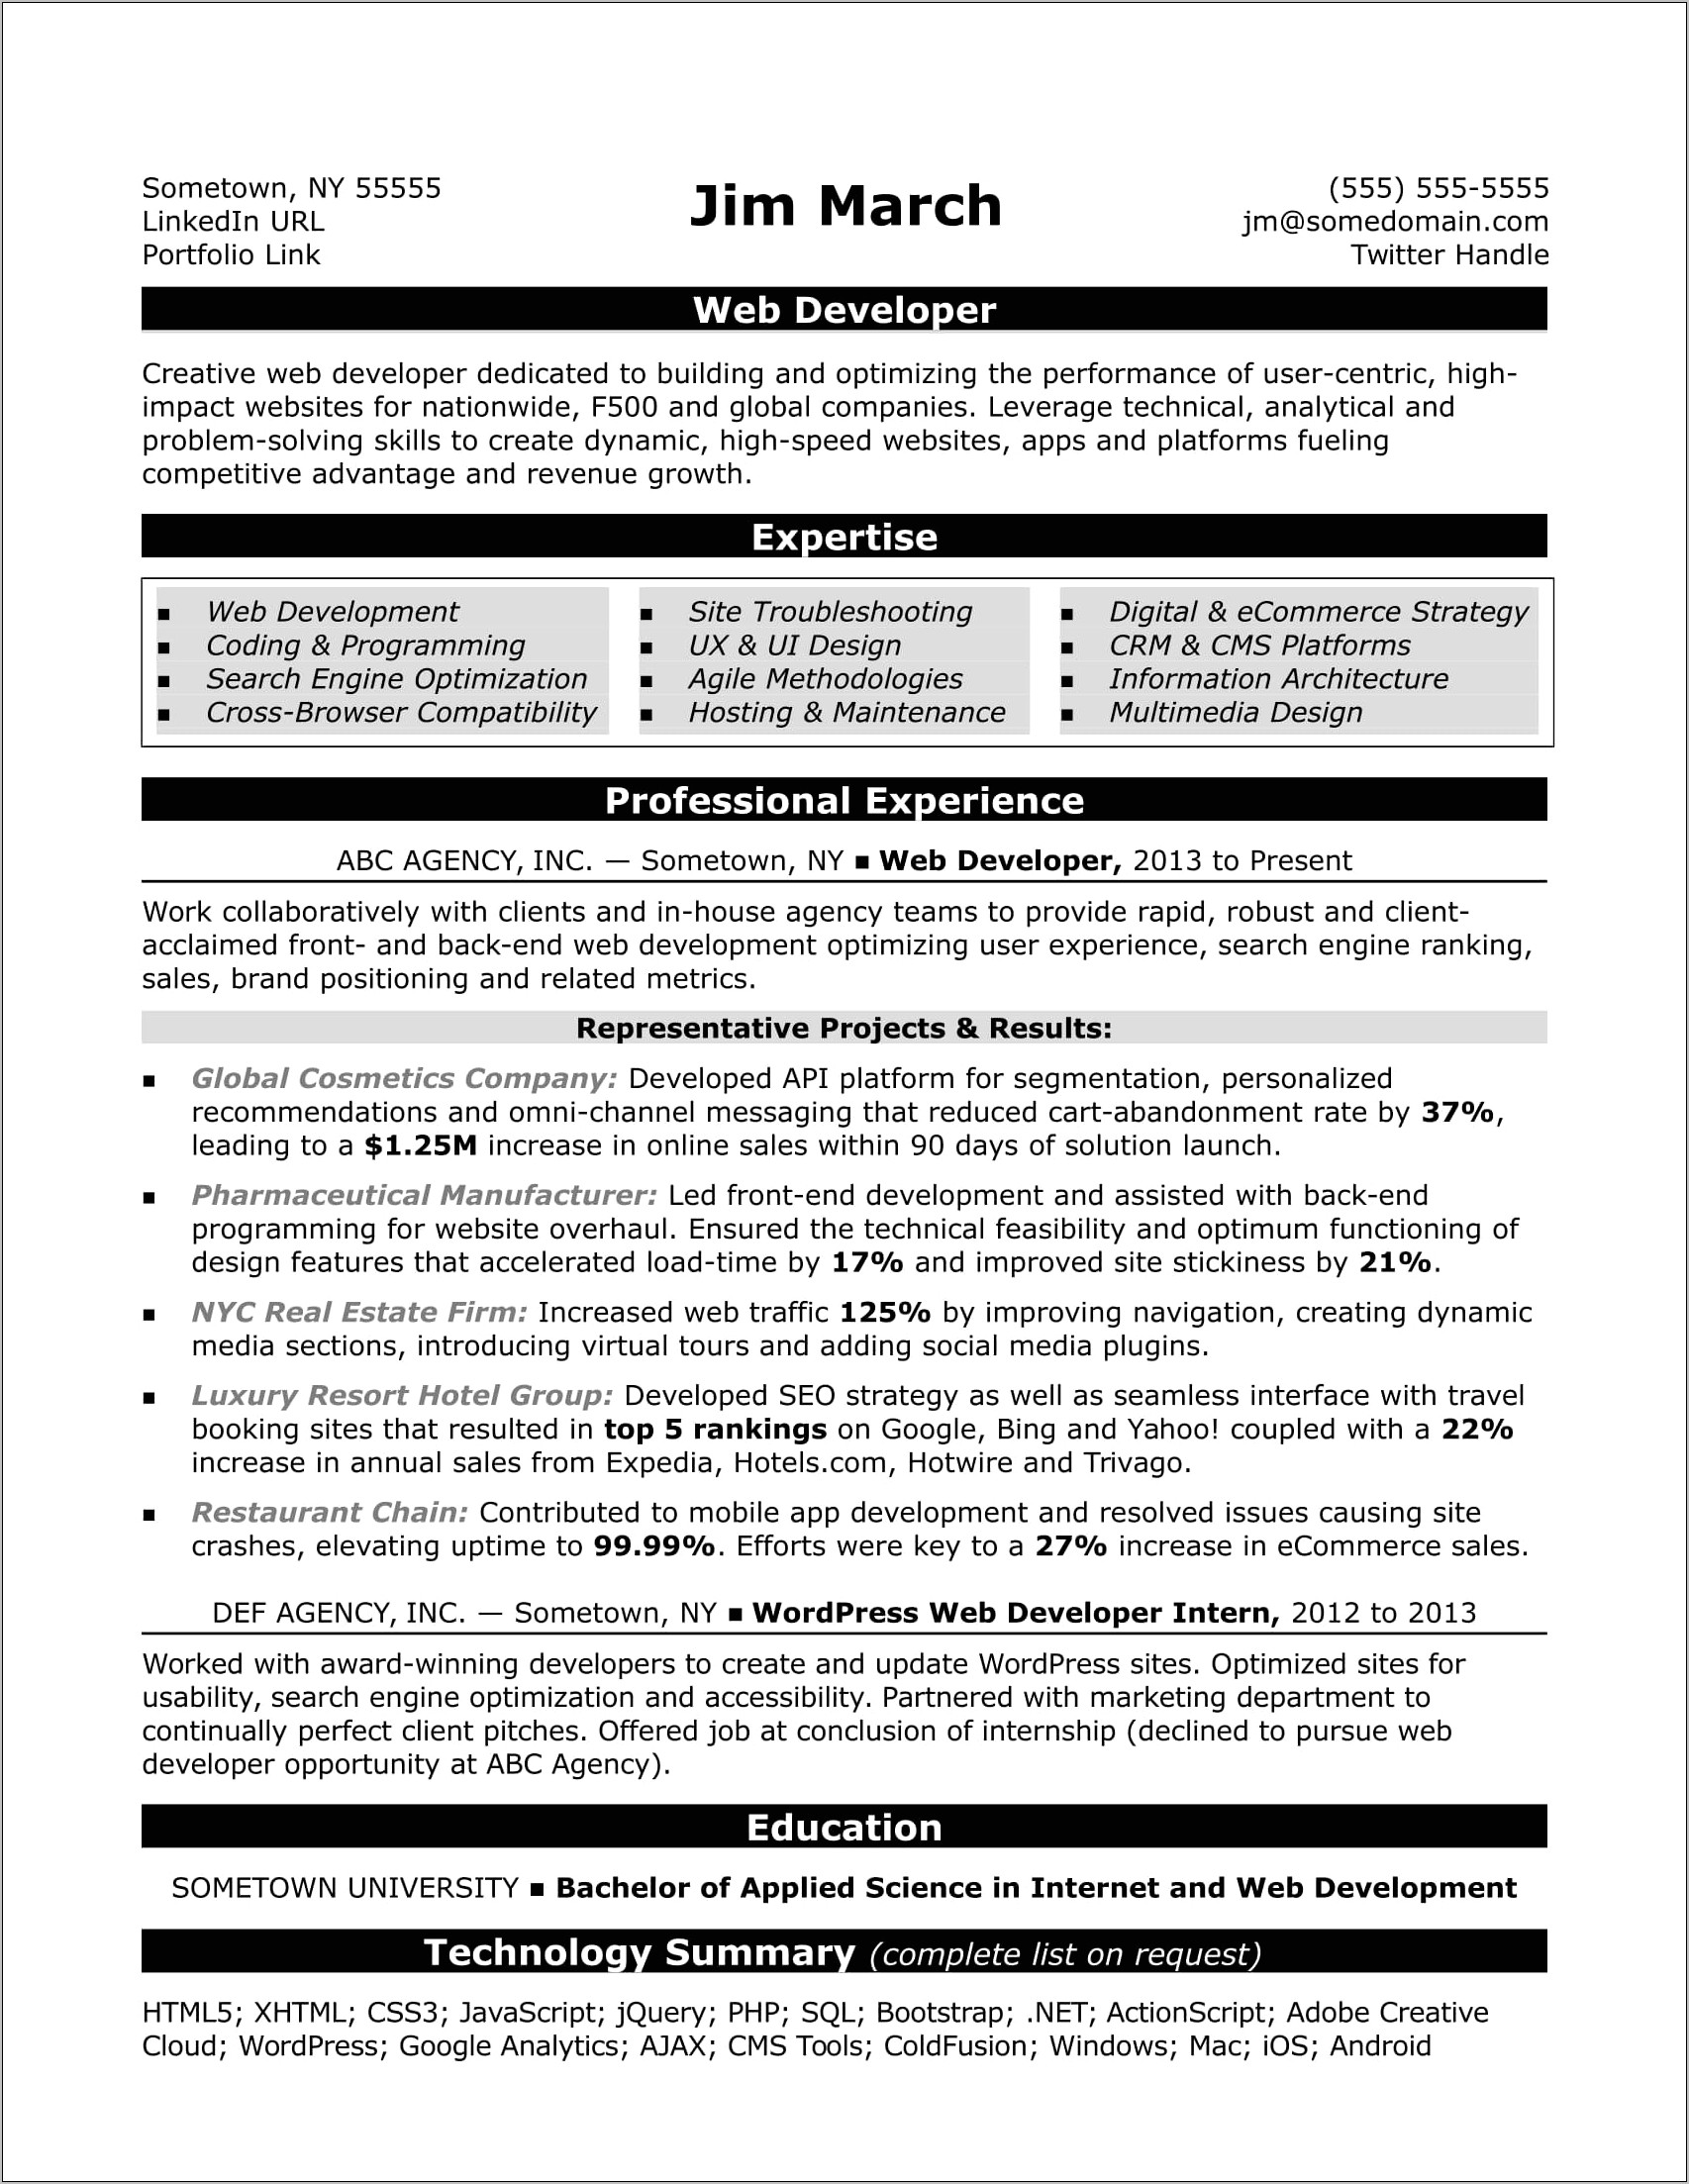 Department Of Labor Resume Examples